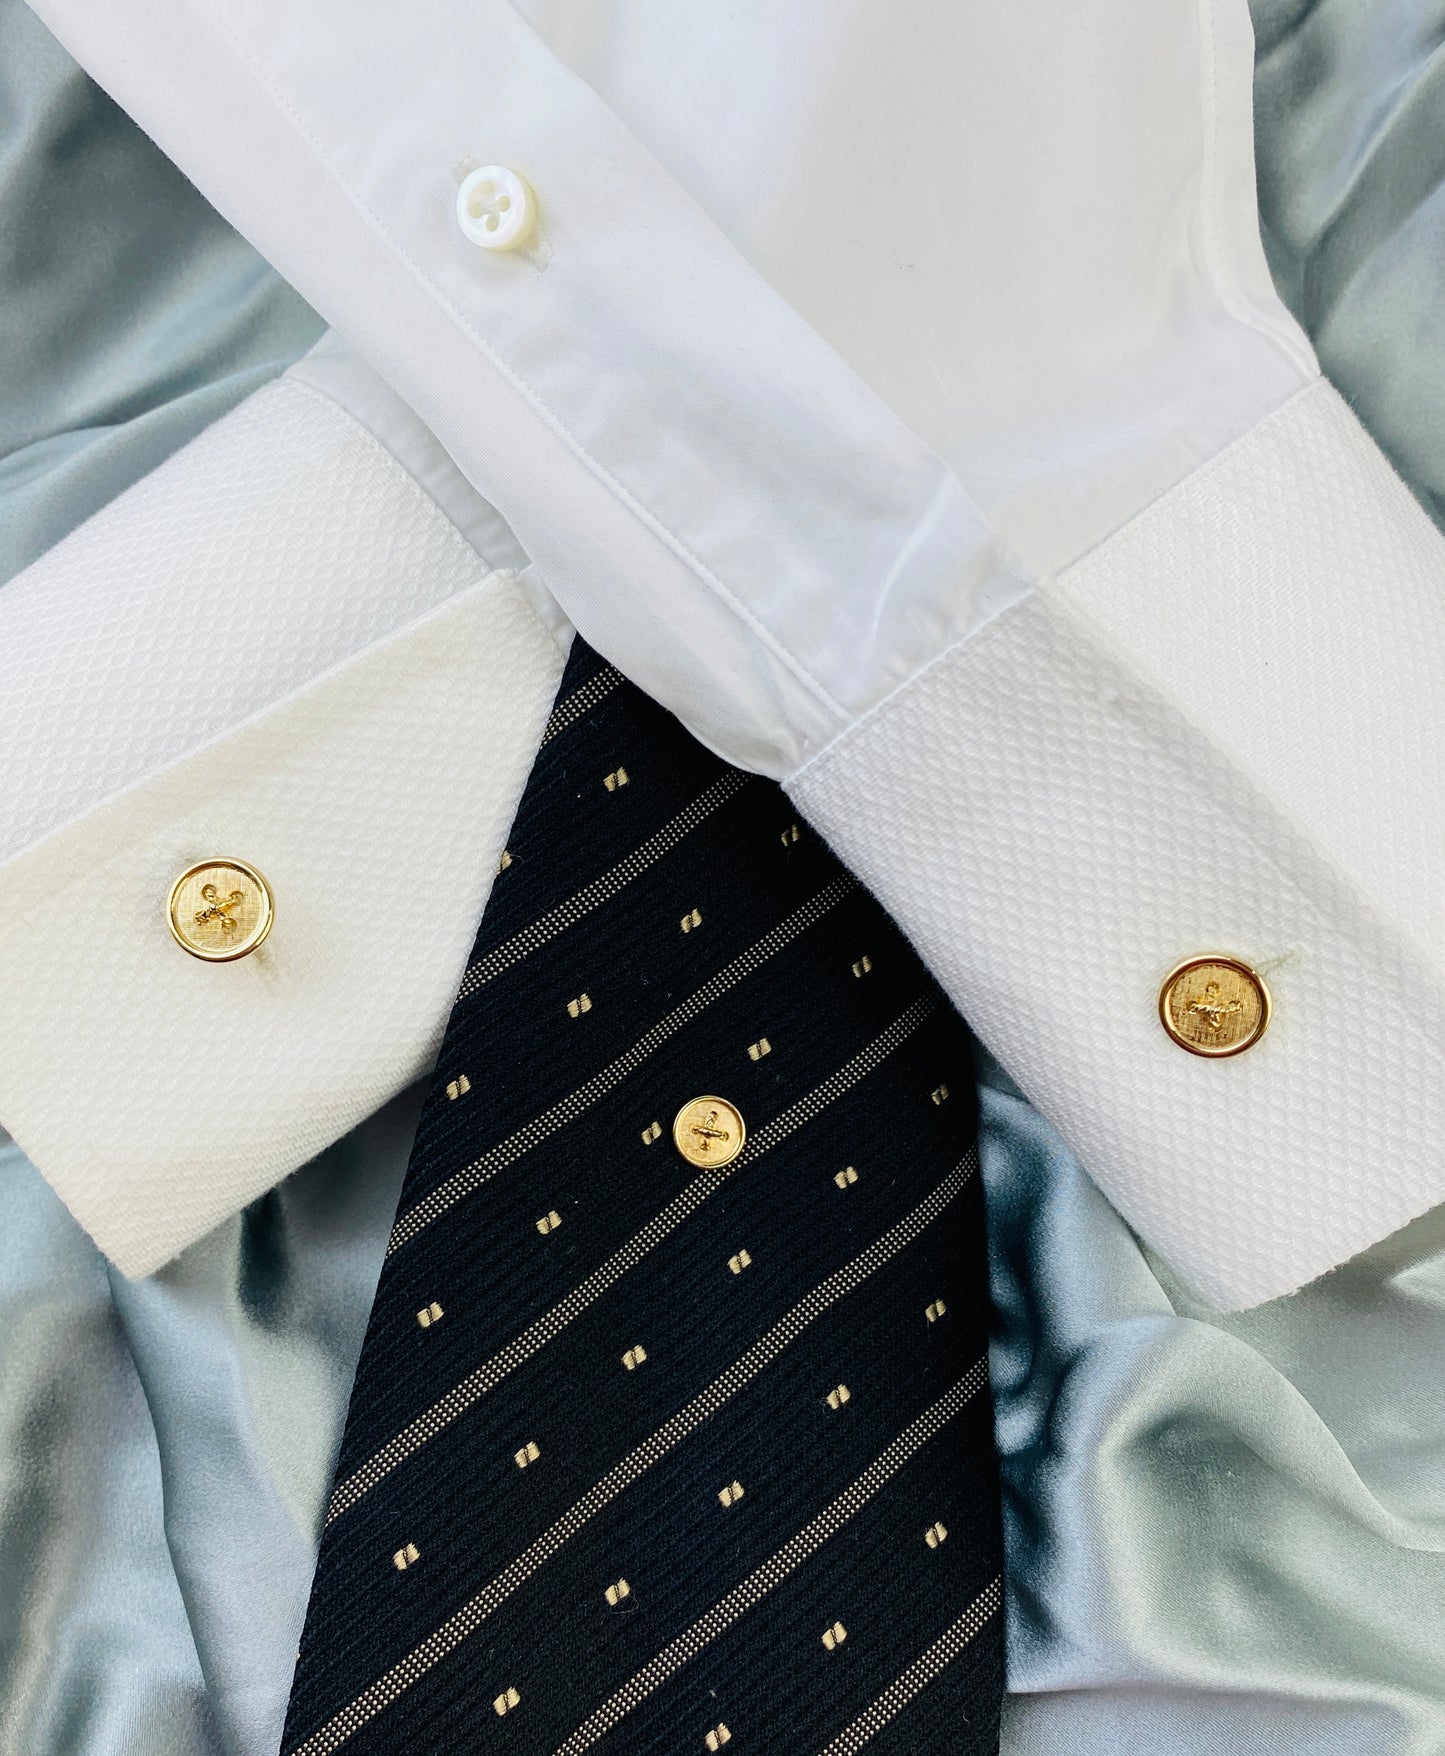 Vintage Gold Button Cufflinks and Tie Tack